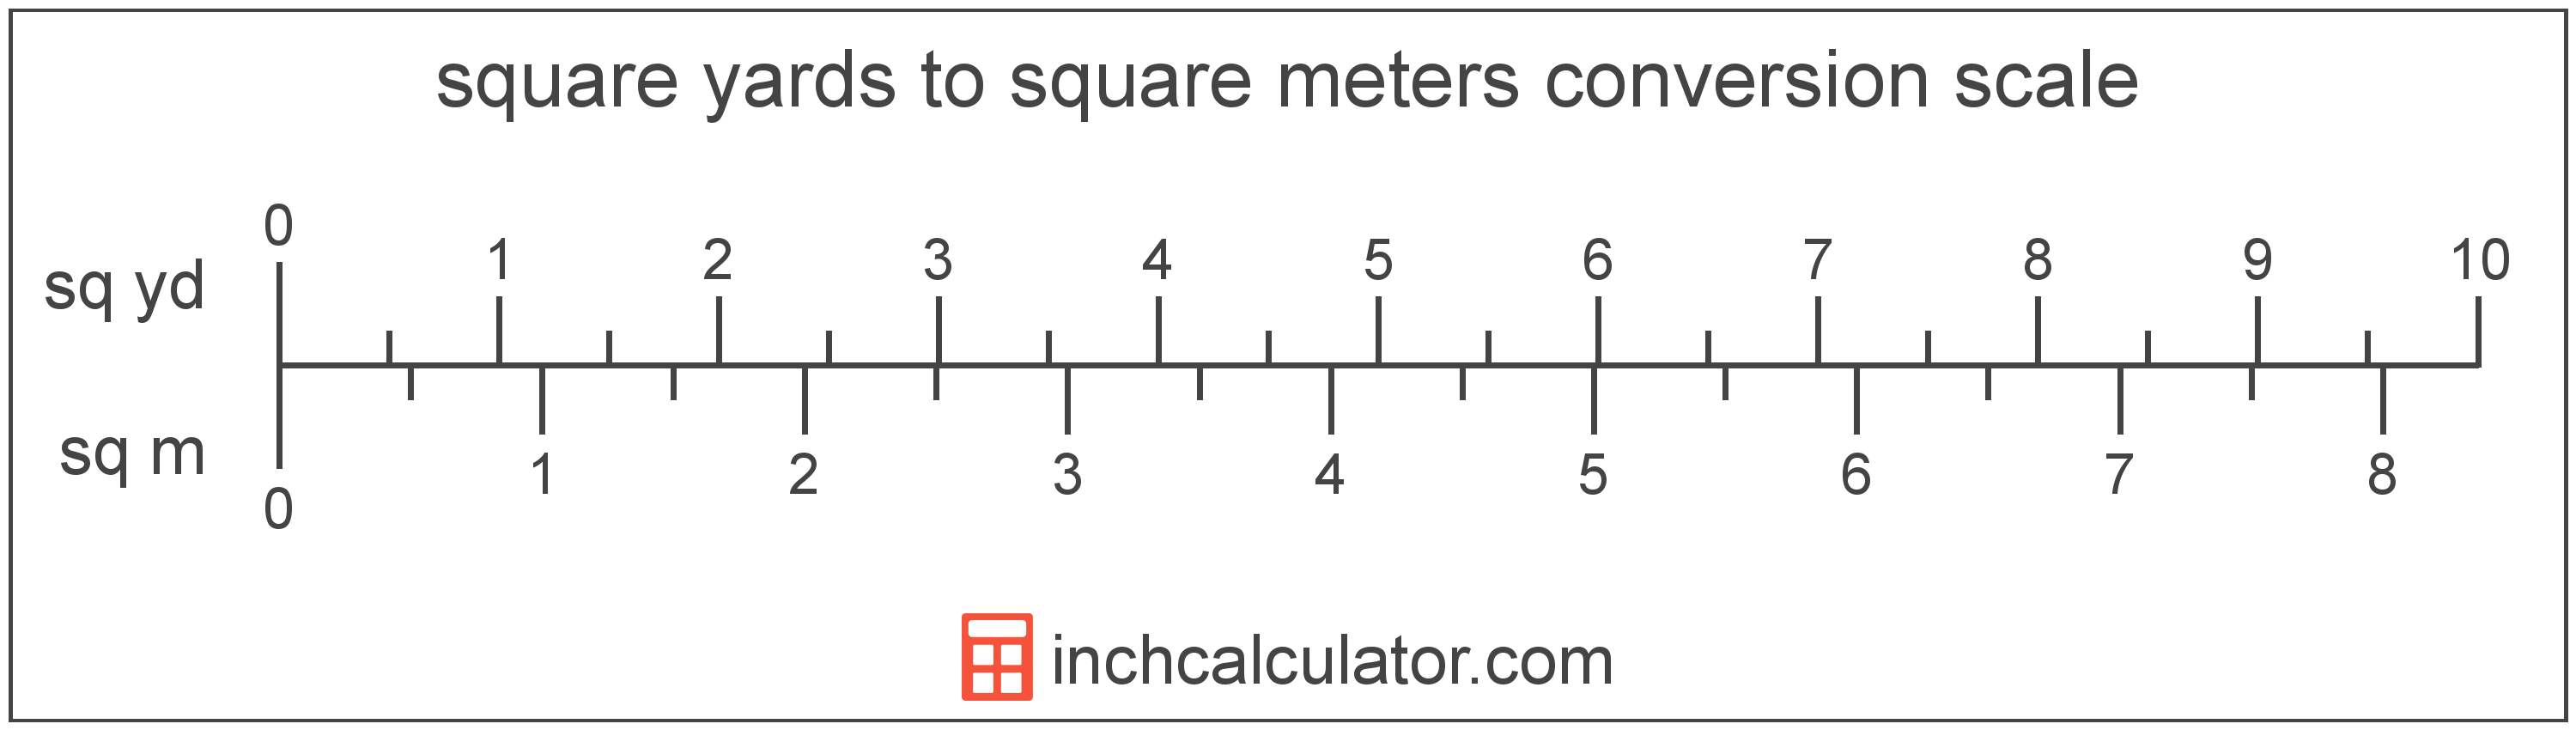 conversion scale showing square meters and equivalent square yards area values